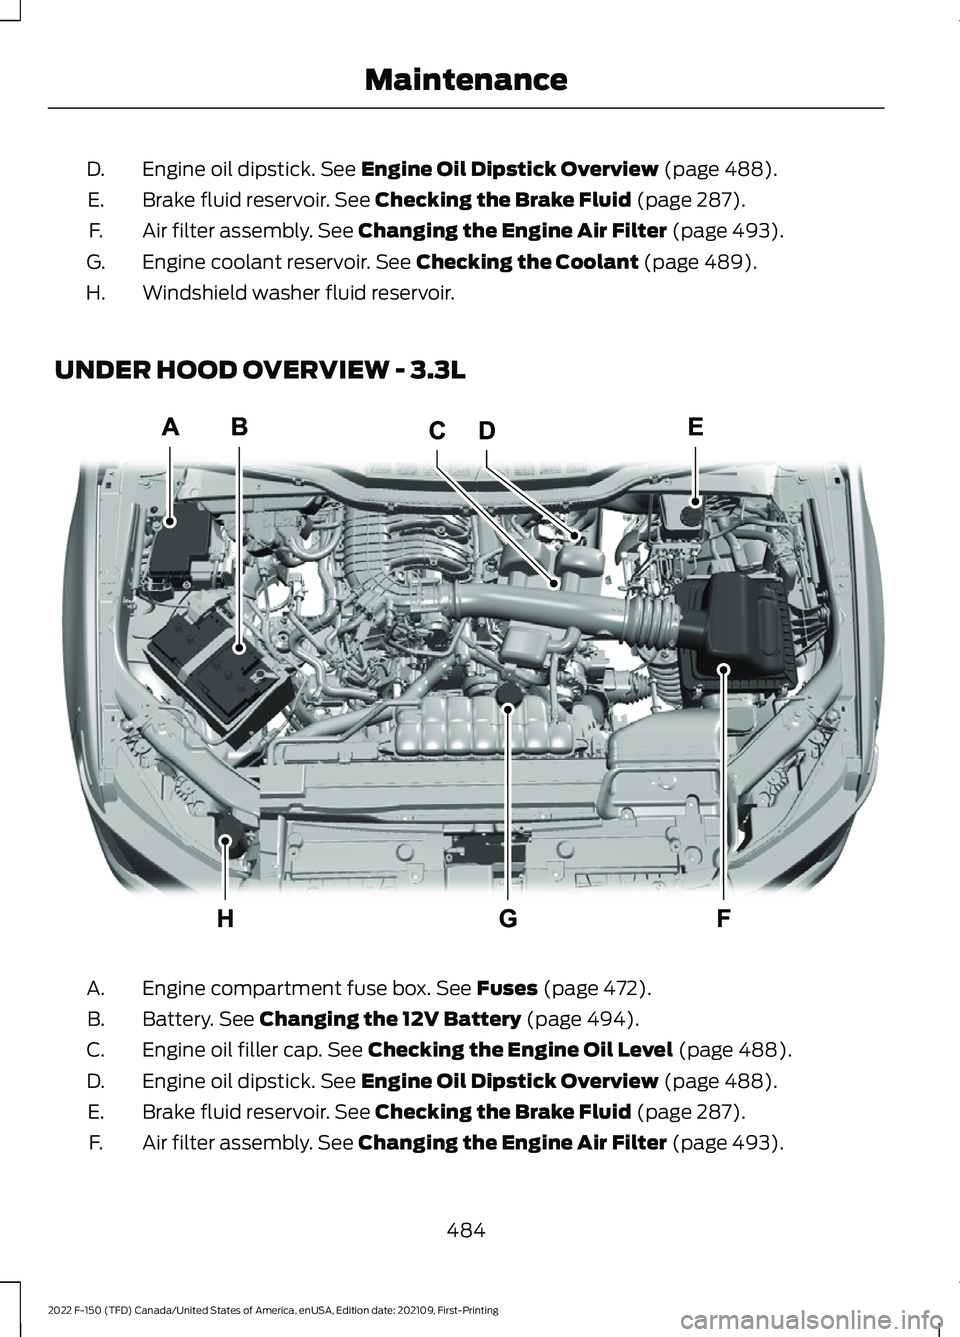 FORD F-150 2022  Owners Manual Engine oil dipstick. See Engine Oil Dipstick Overview (page 488).
D.
Brake fluid reservoir.
 See Checking the Brake Fluid (page 287).
E.
Air filter assembly.
 See Changing the Engine Air Filter (page 